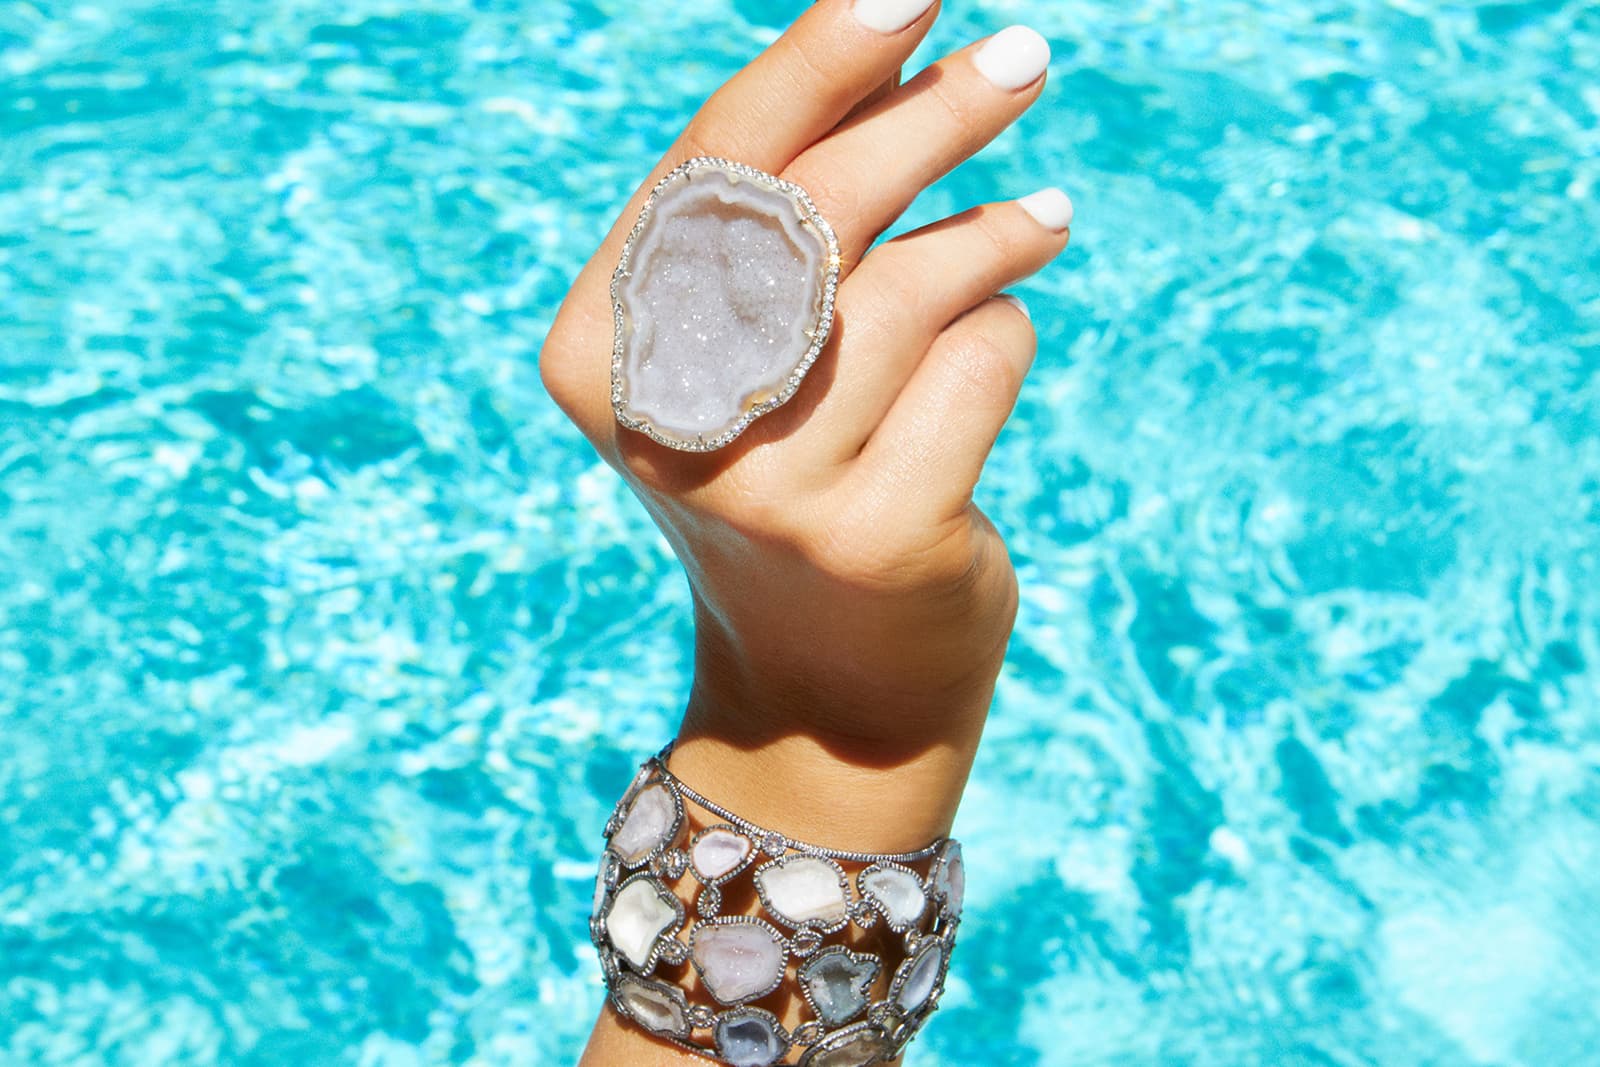 Kimberly McDonald geode ring and bracelet. The NYC-based designer believes that stones evoke or amplify different moods, geodes in particular, which “just seem happy”